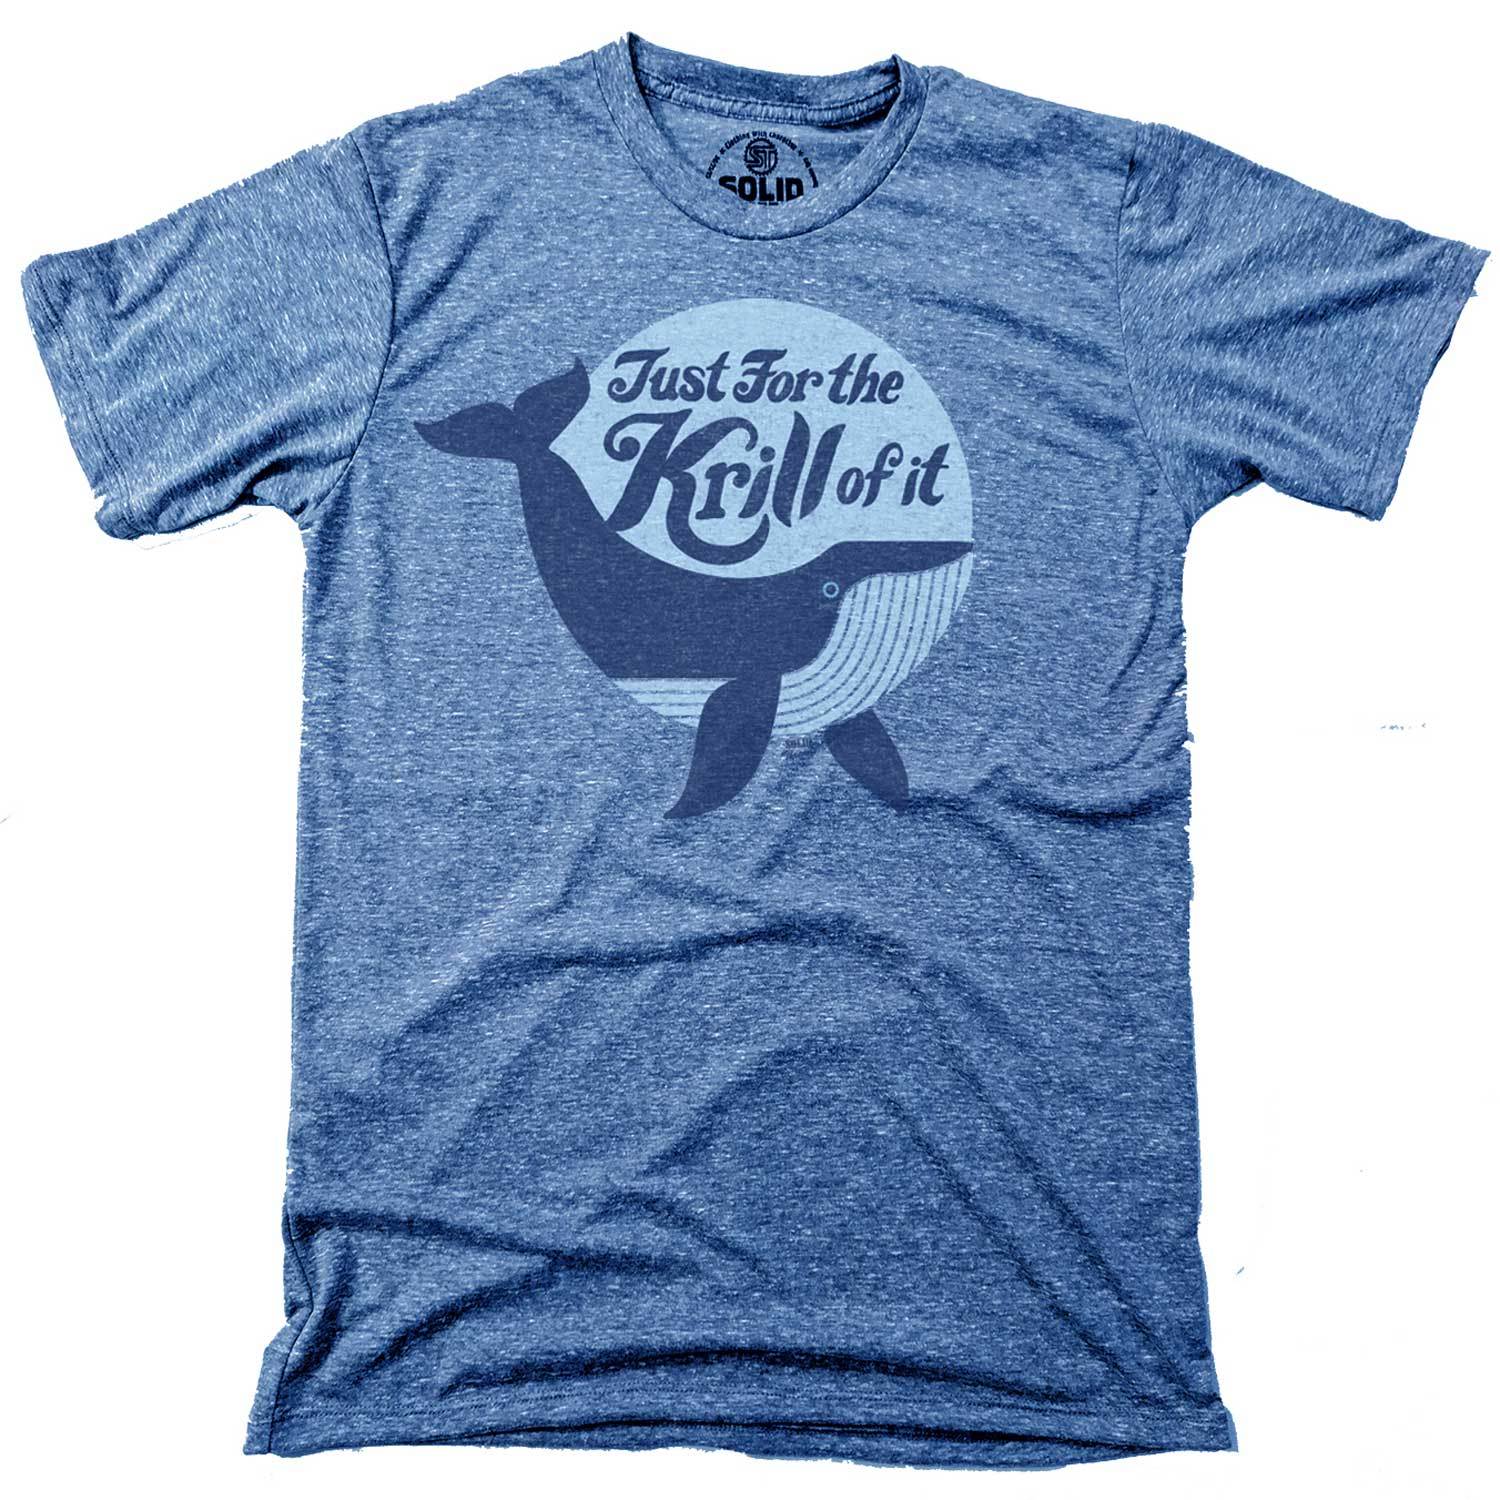 Men's Just For the Krill of It Vintage Graphic Tee | Funny Whale T-shirt | Solid Threads